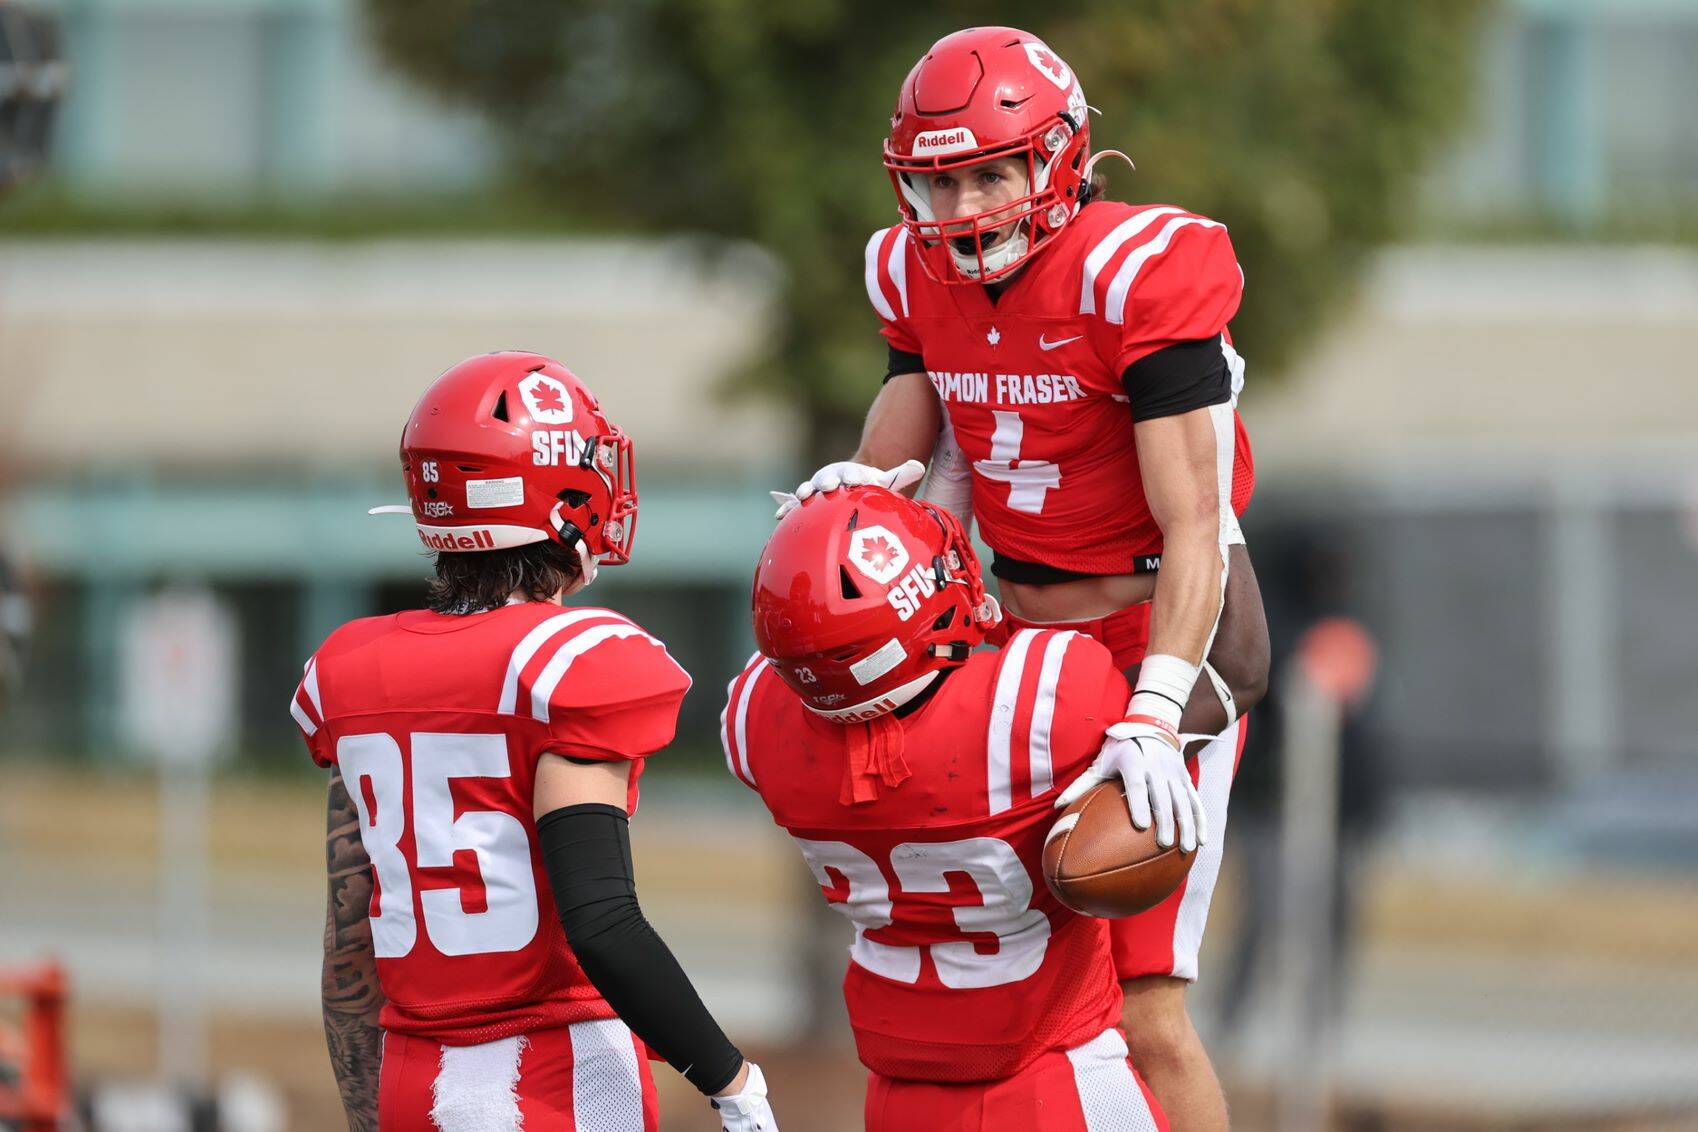 West Kelowna native Ethan Beselt (number 4) put scouts on notice at the Invitational Combine as he looks to get an invite to the CFL Combine. (SFU Red Leafs/Contributed)